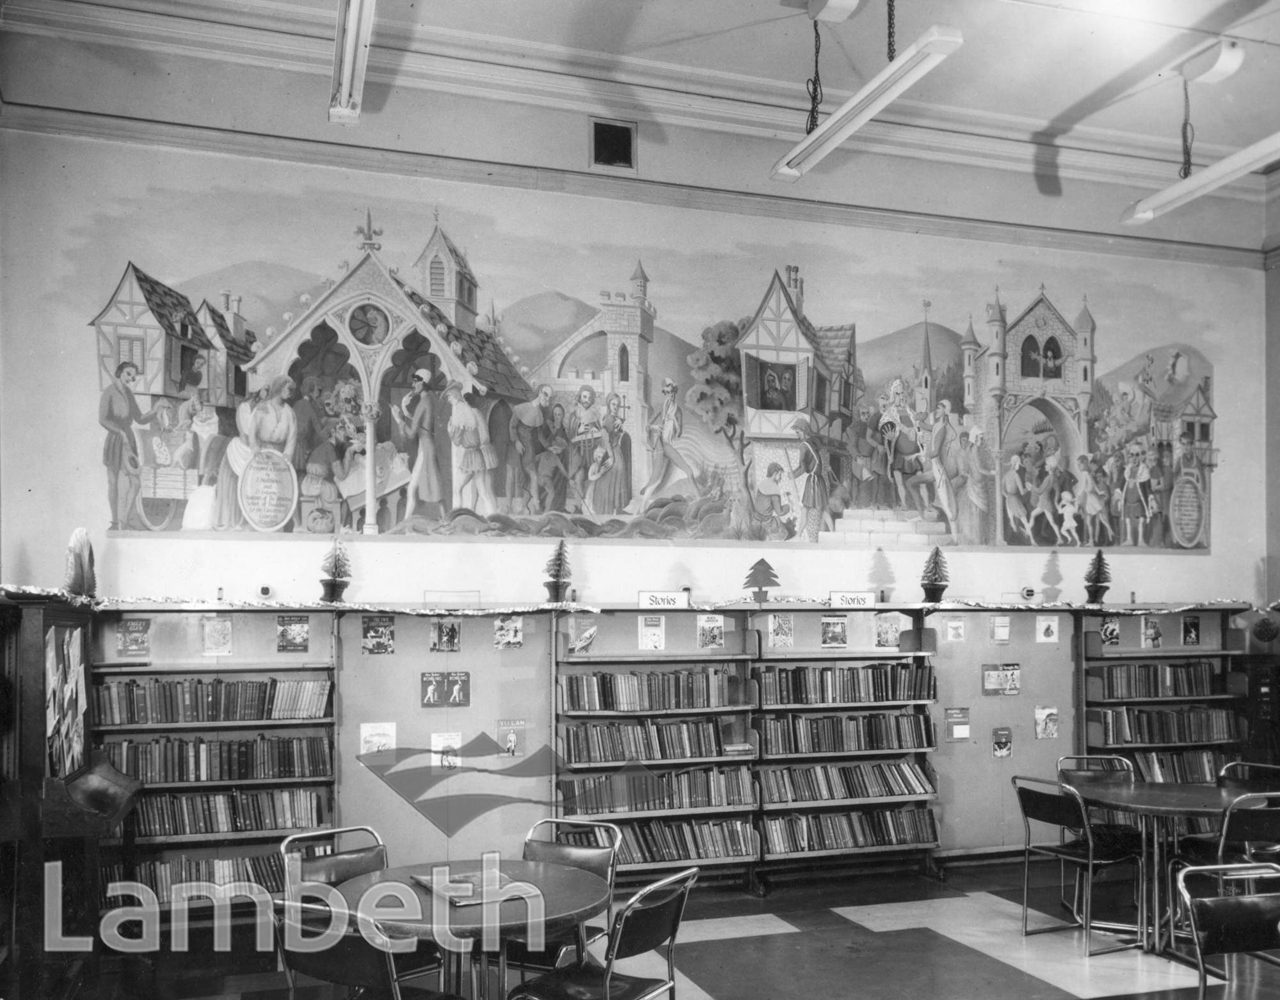 amazing mural depicting a mediaeval village scene in Durning Library, 1952